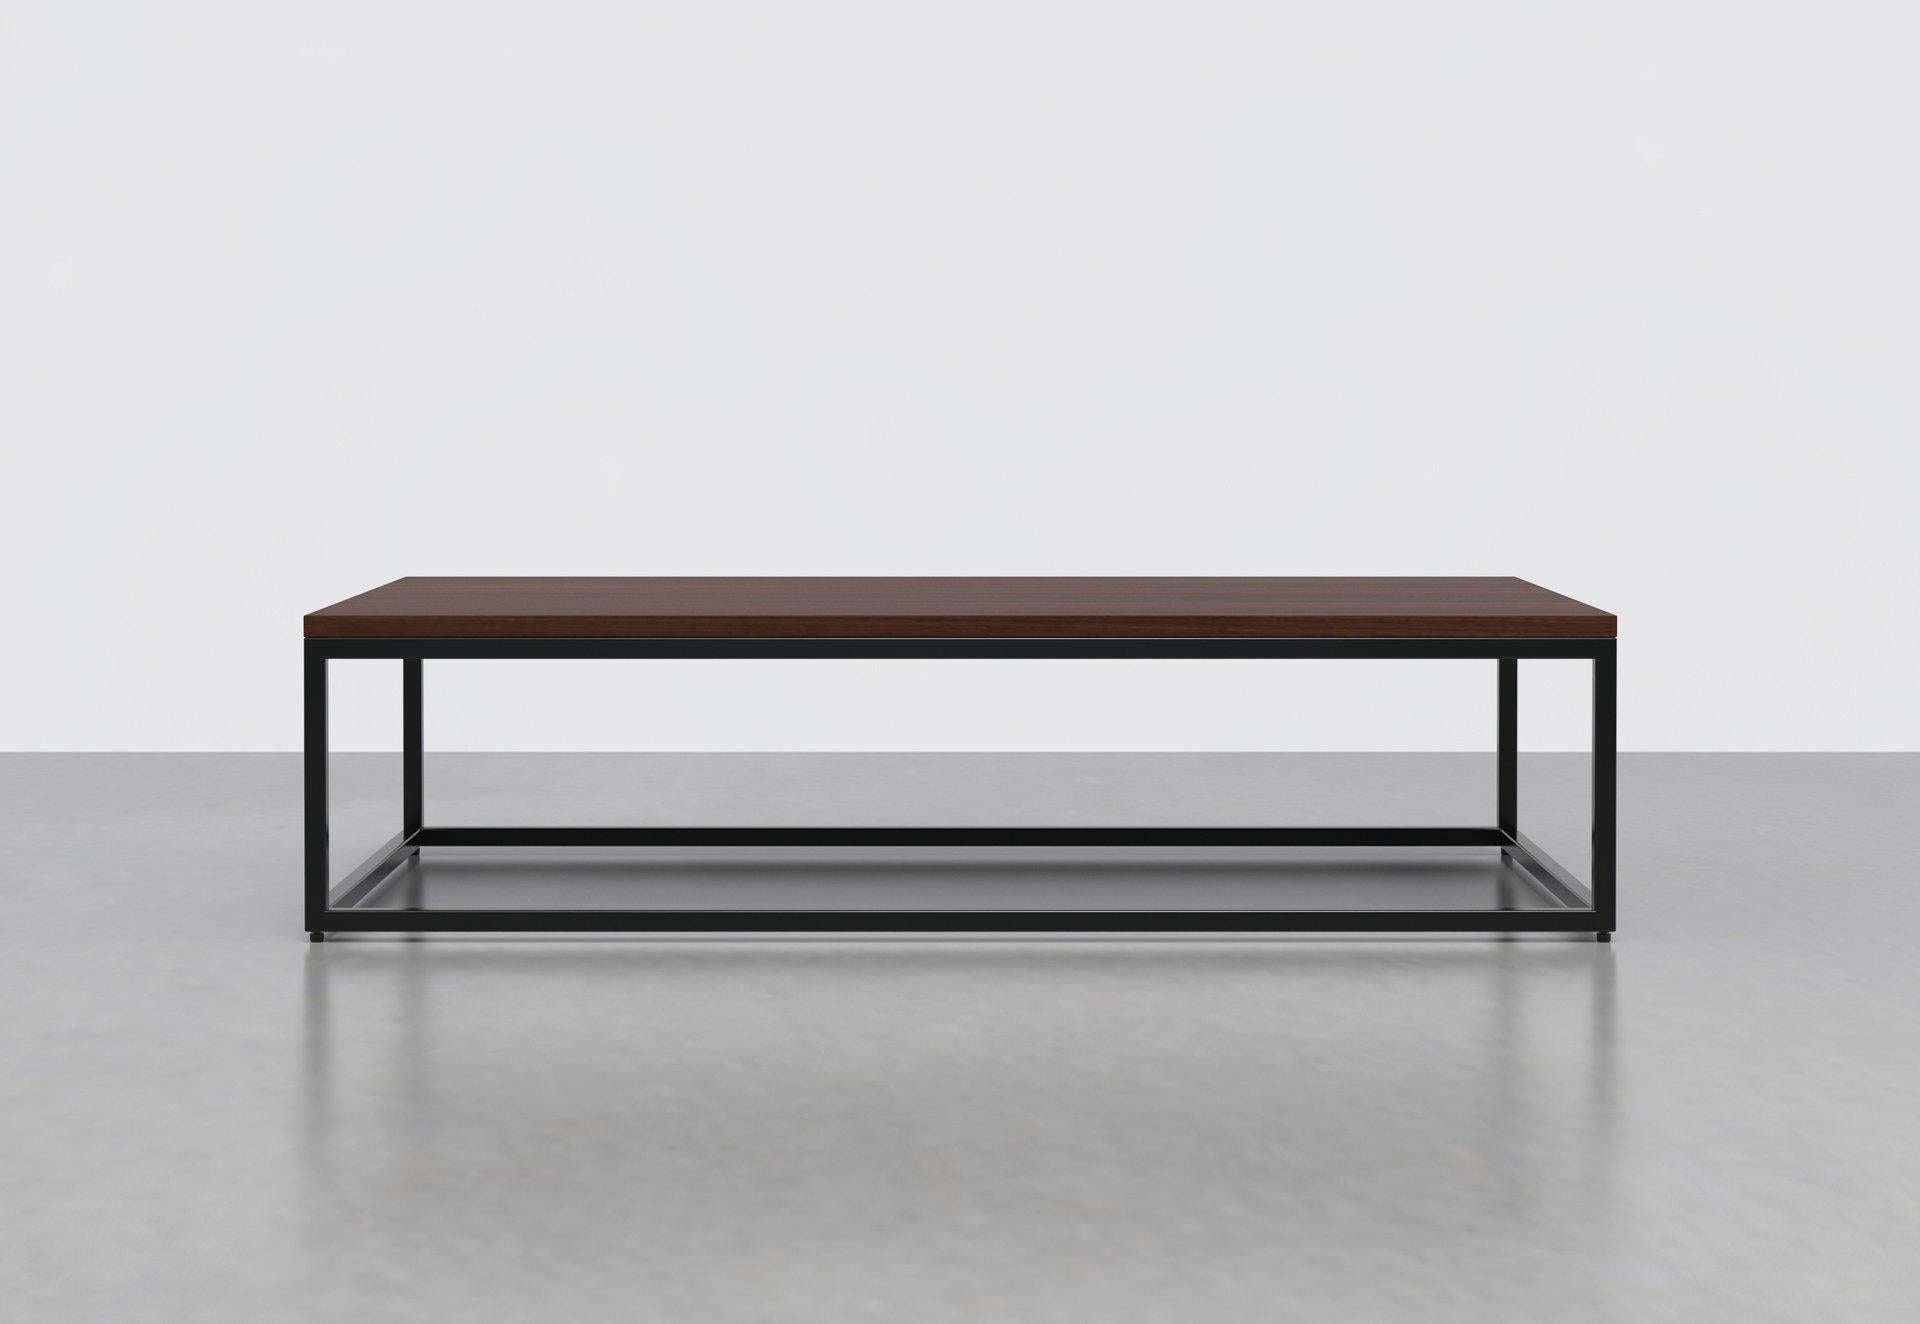 The 1 x 1 coffee table's simple frame allows you to fit it into any space and pairs well with any interior style. Great in any living room or lobby area. Measures: 60